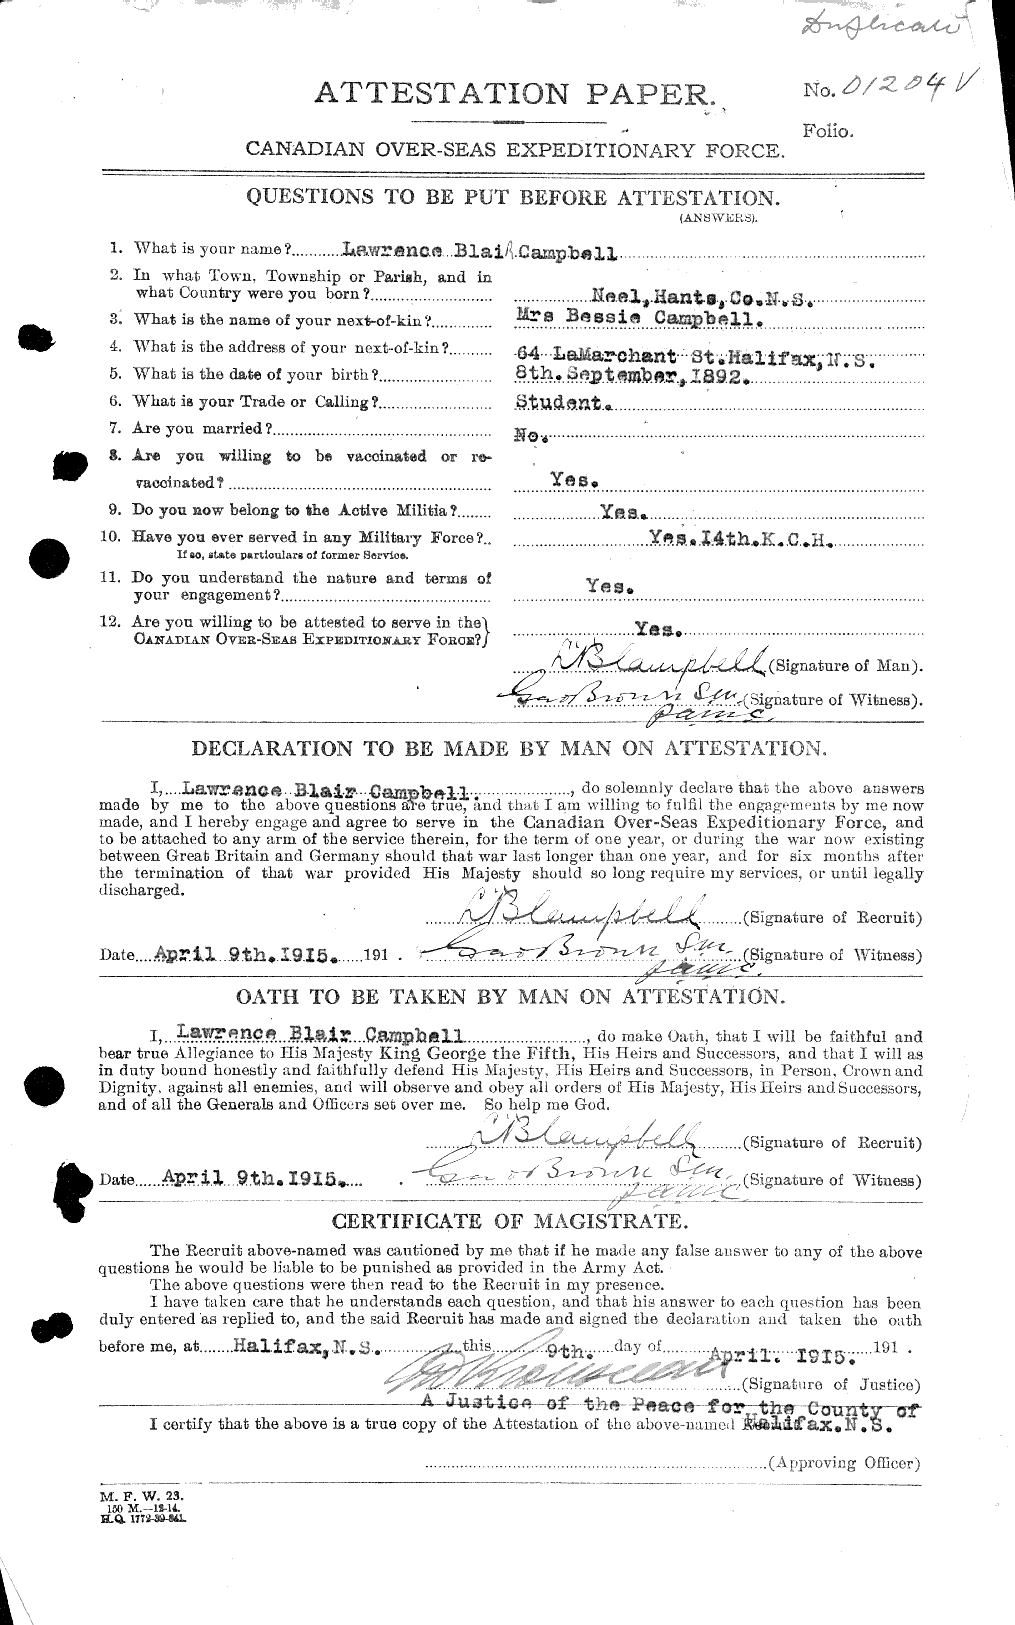 Personnel Records of the First World War - CEF 002782c